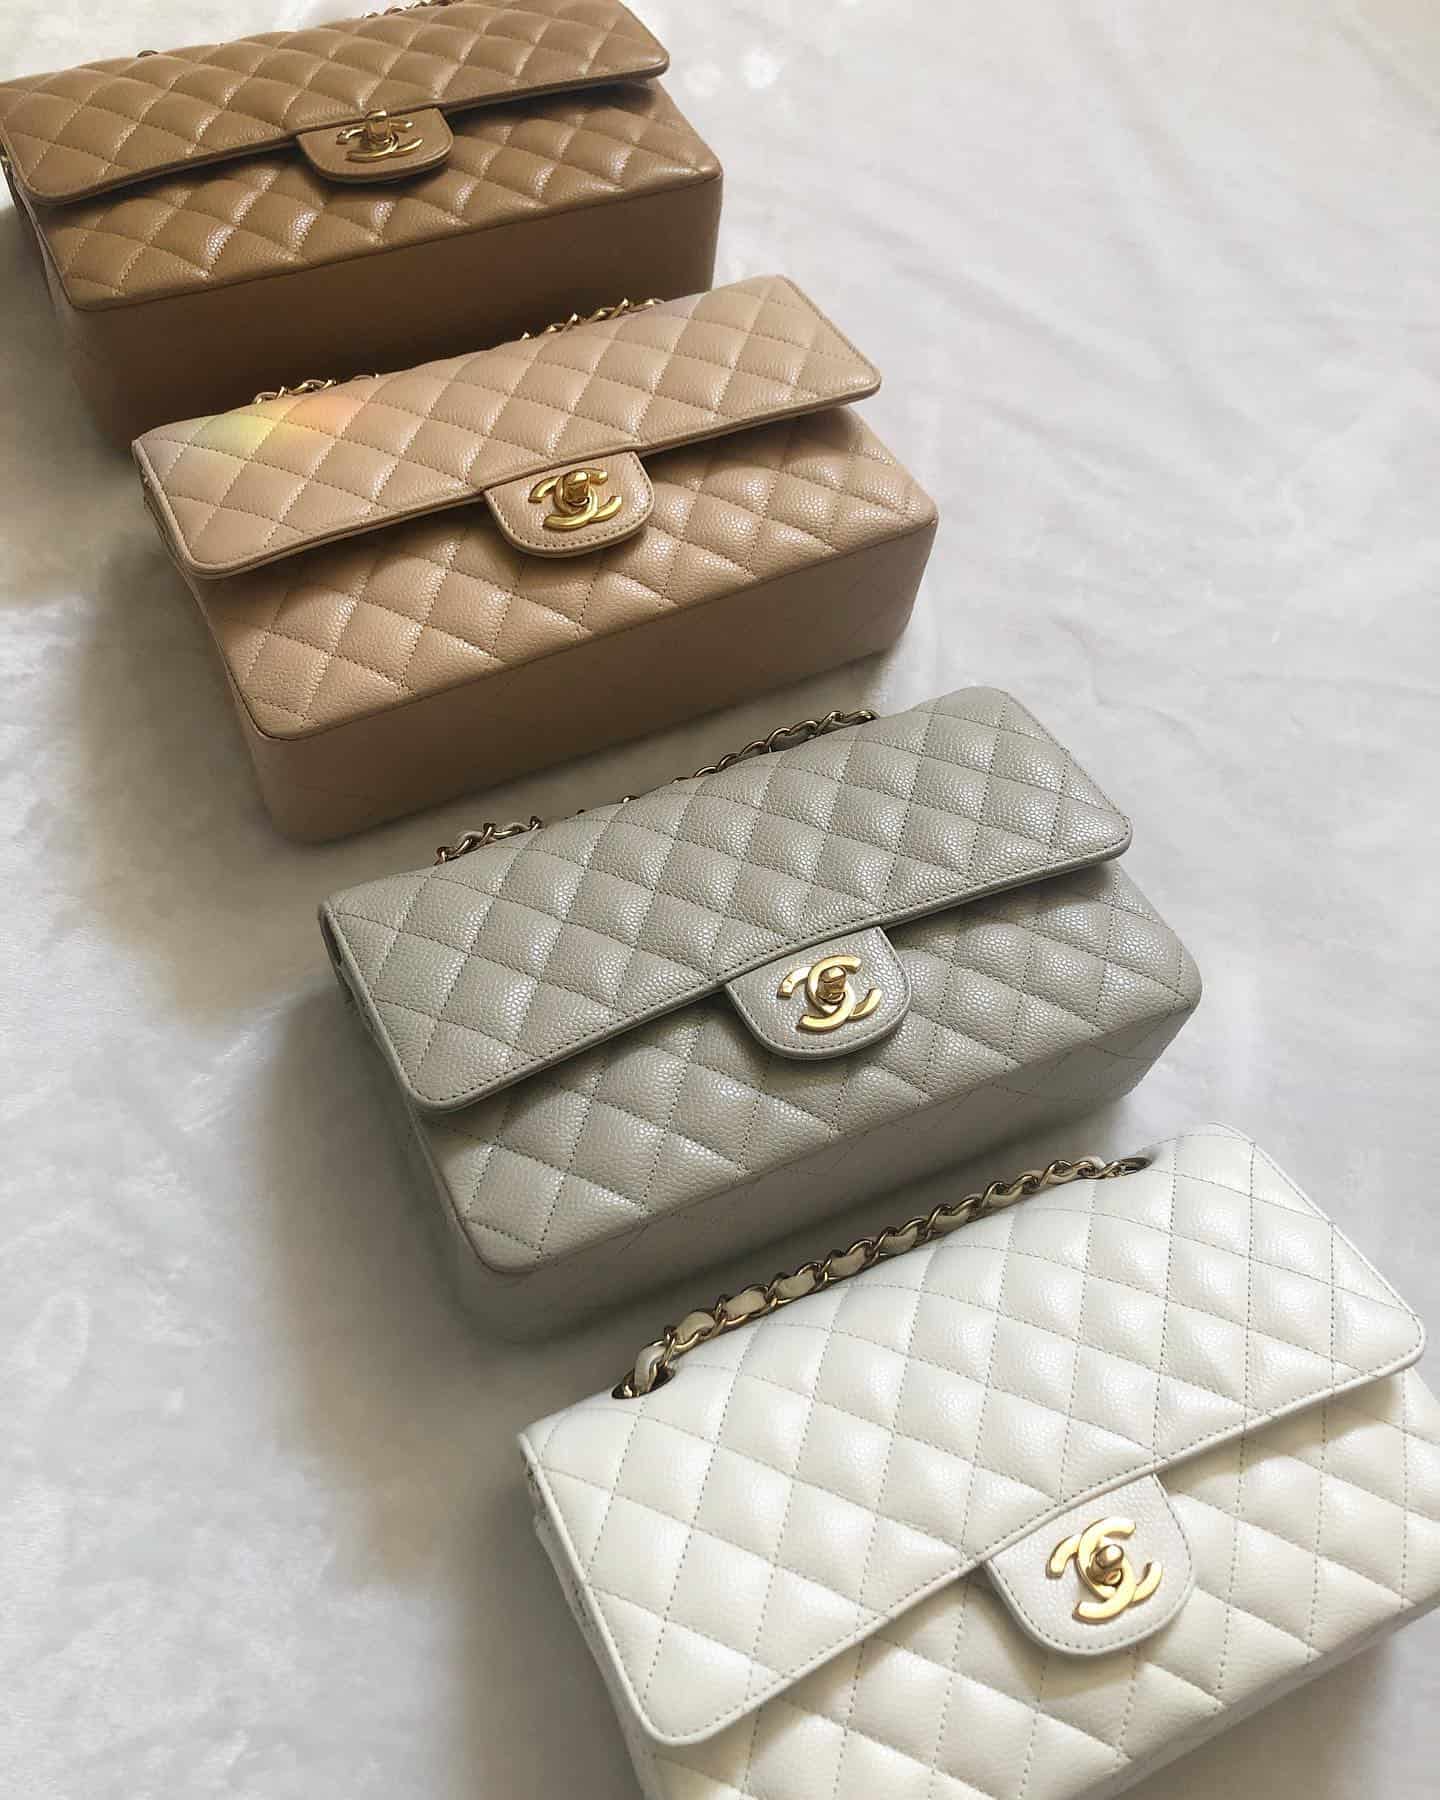 Neutral Chanel bags